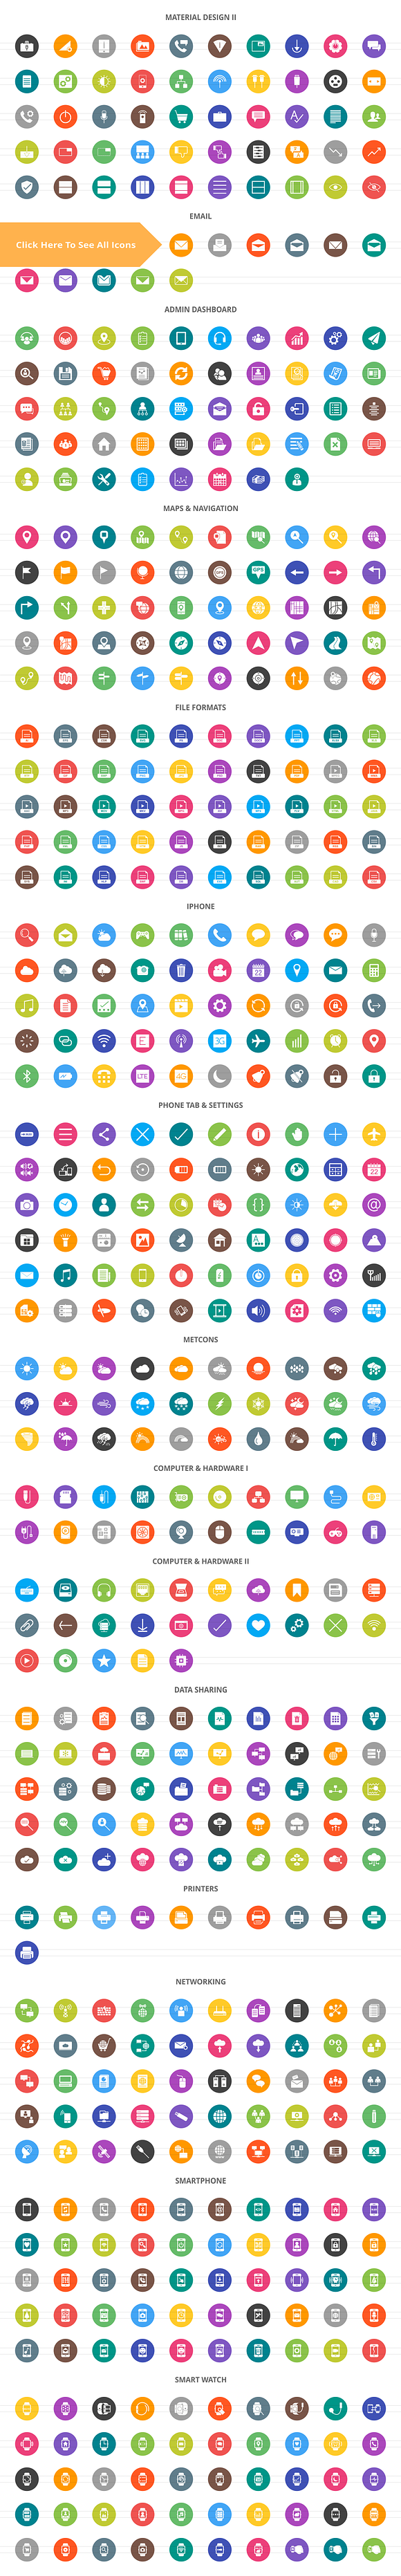 1779 Digital Filled Round Icons in Graphics - product preview 2